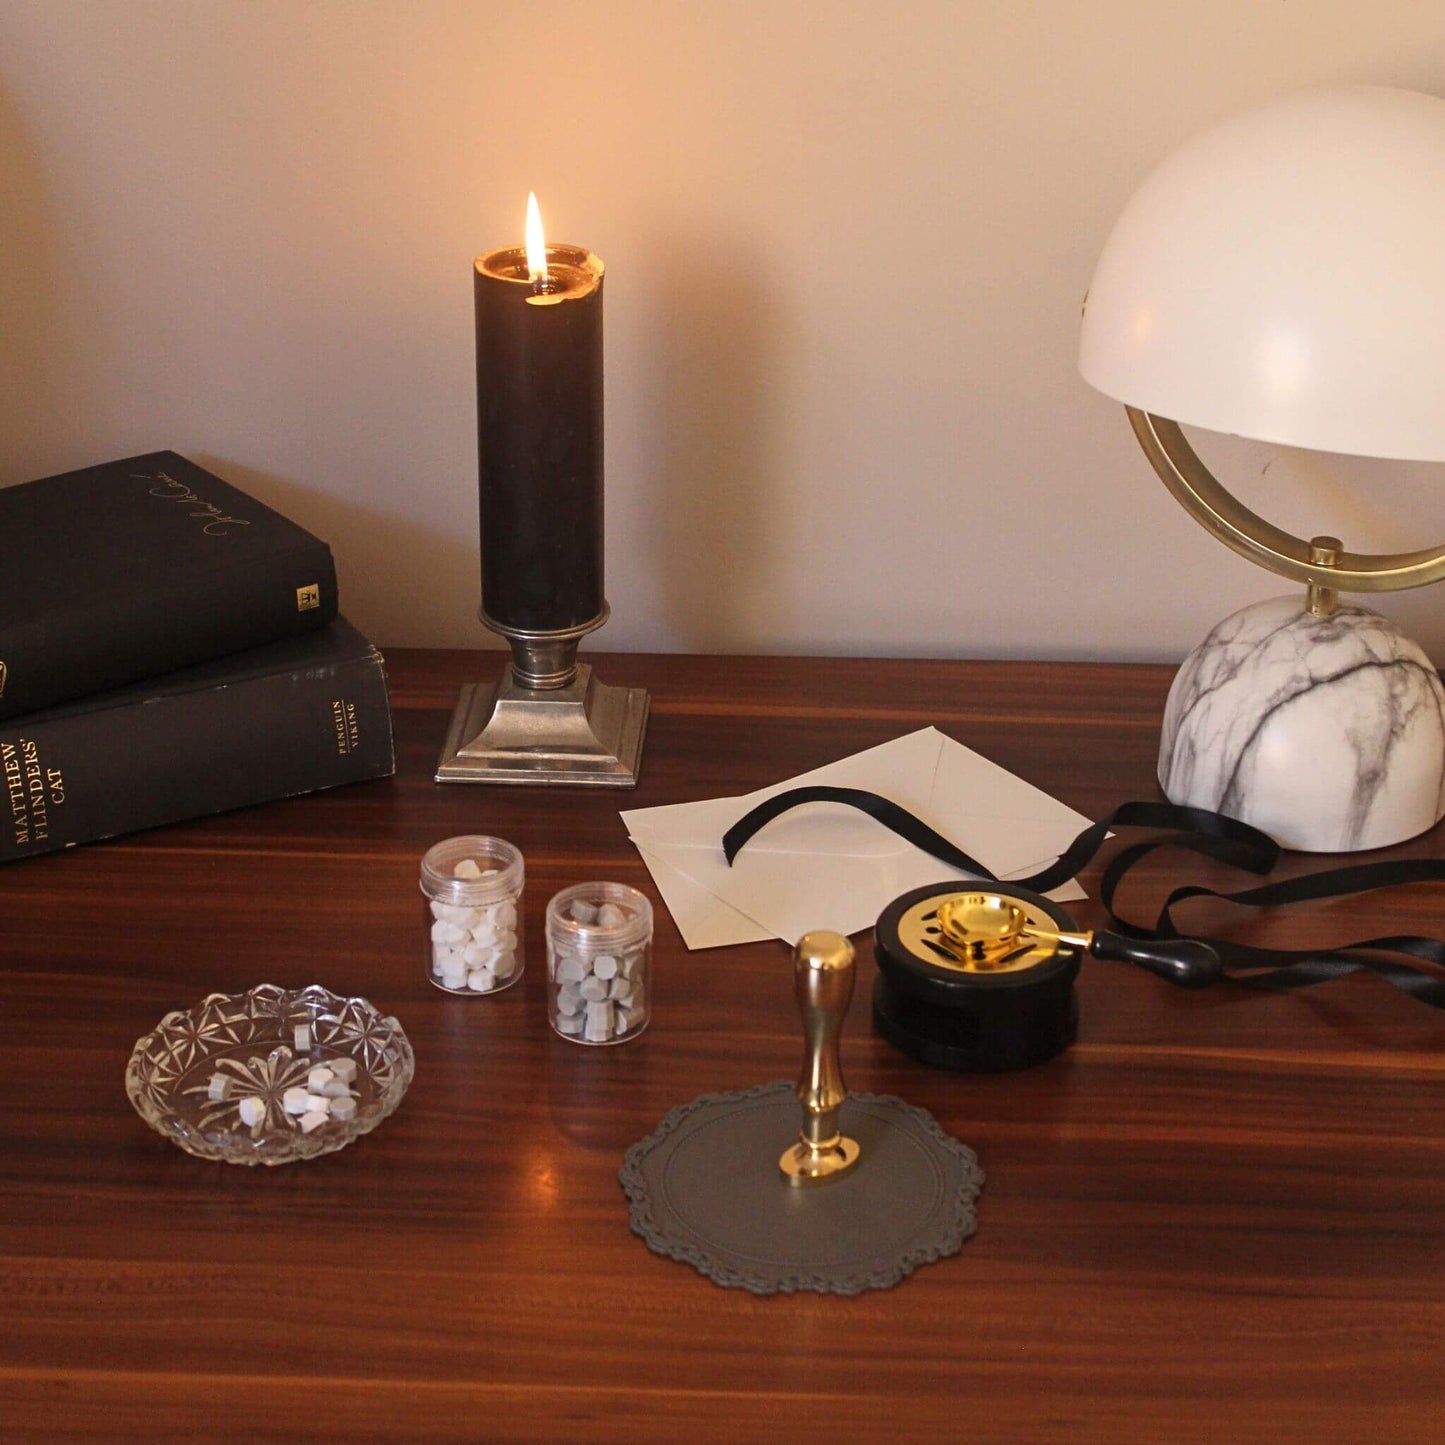 Brass wax seal and sealing wax on desk with candle and vintage books